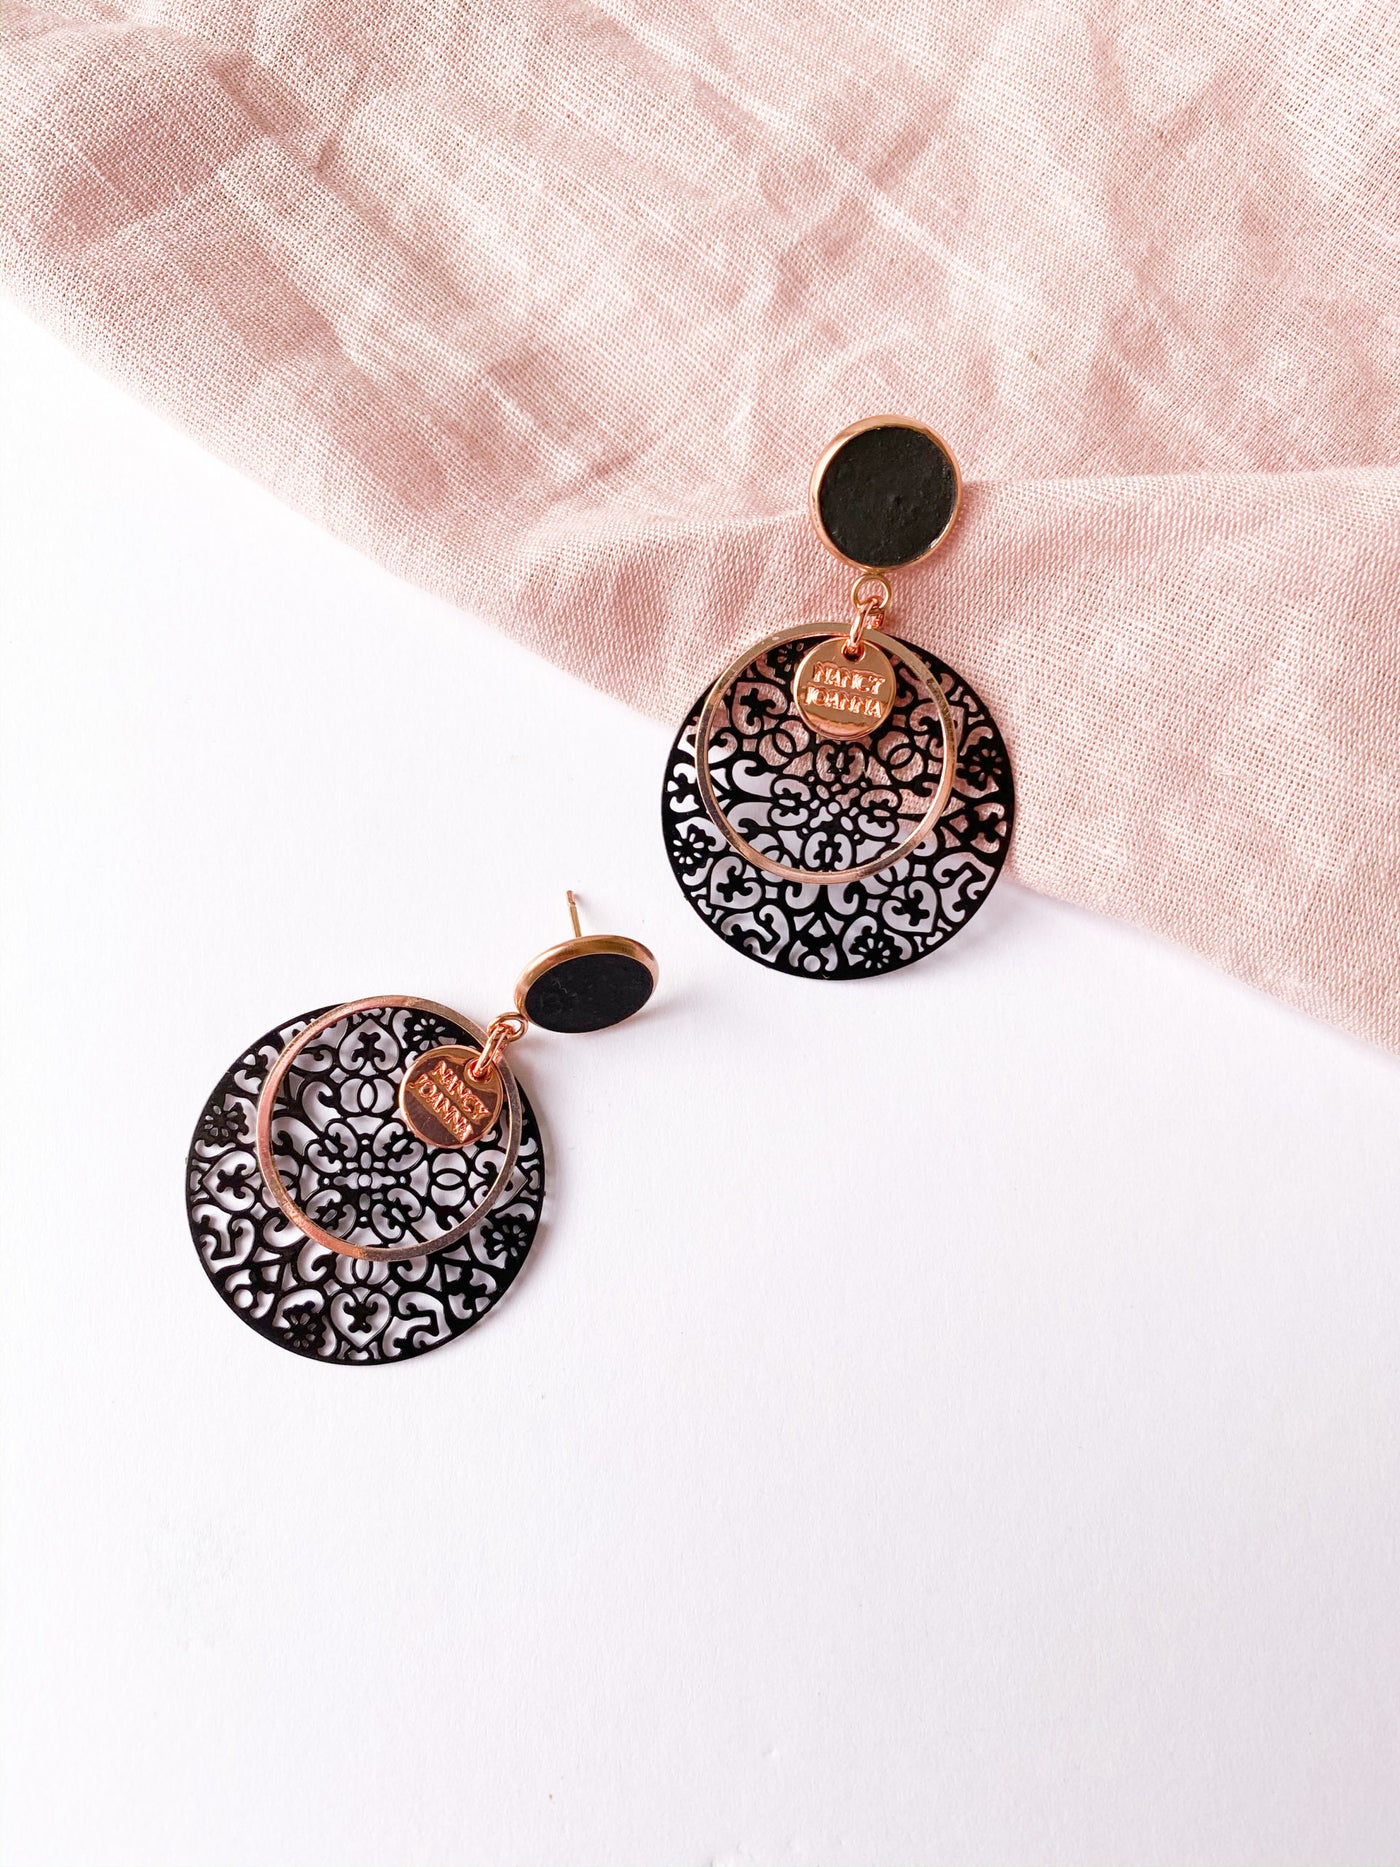 Black Concrete with Round Black Lace Earrings Nancy Joanna